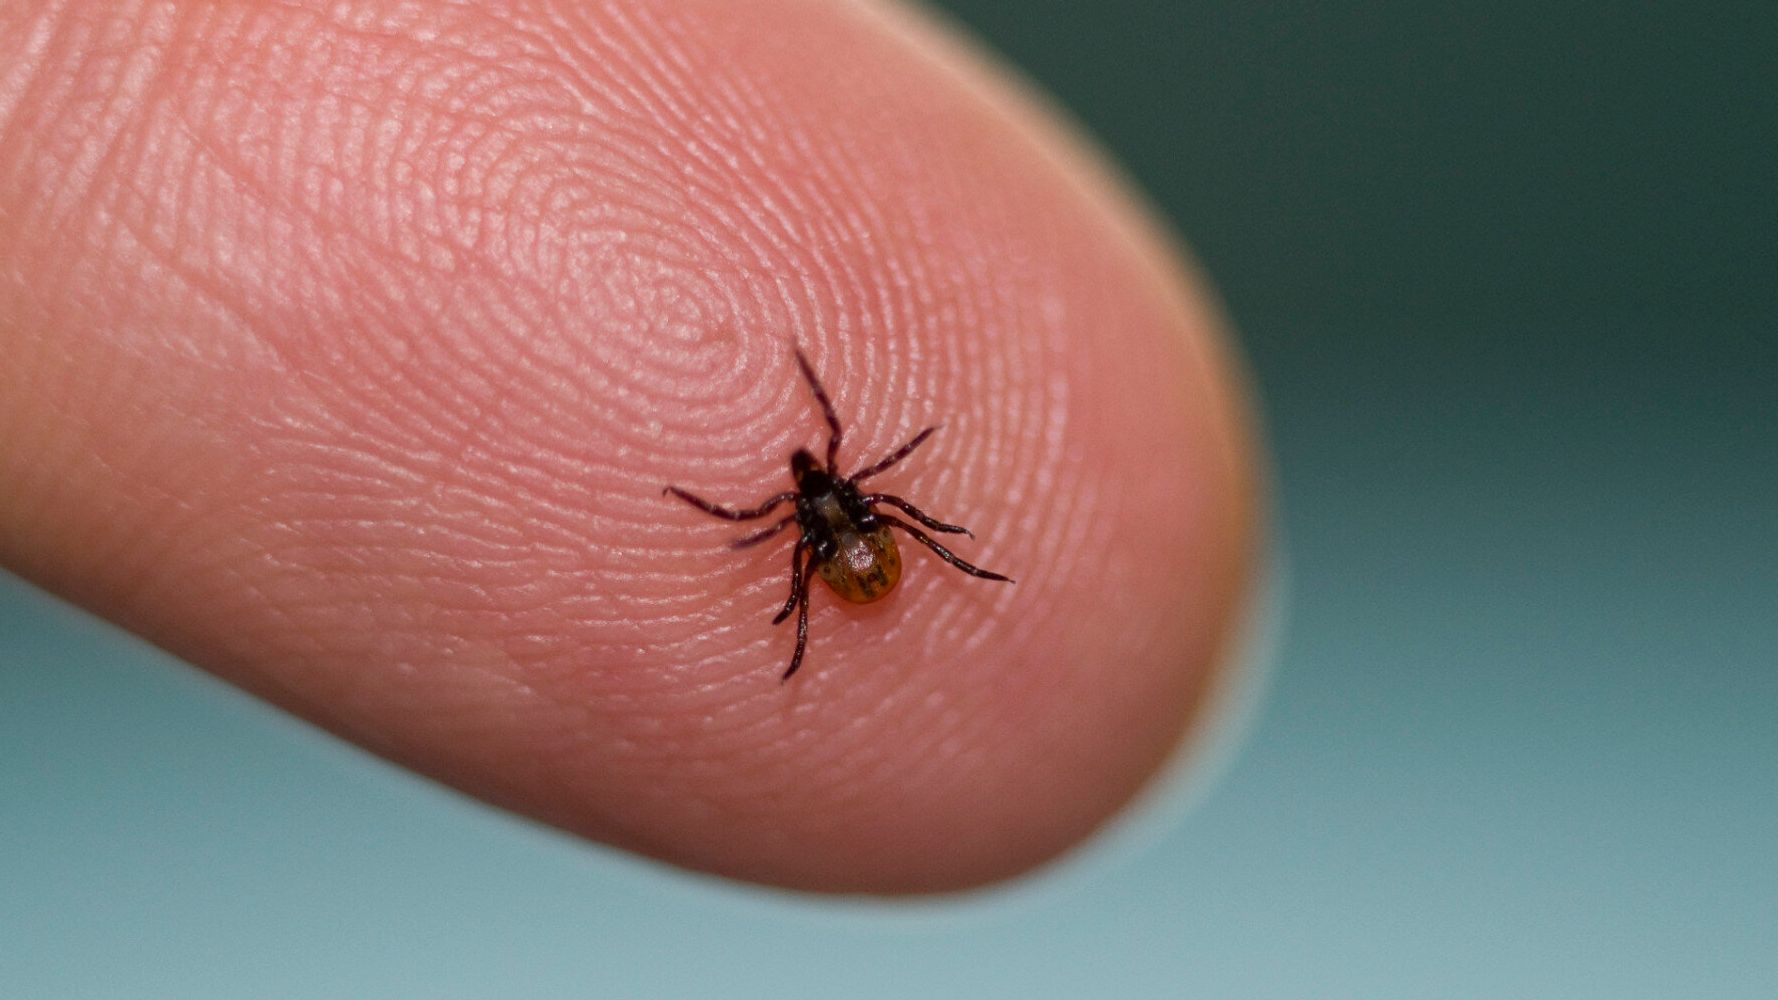 How Great A Threat Is Lyme Disease To Public Health? 